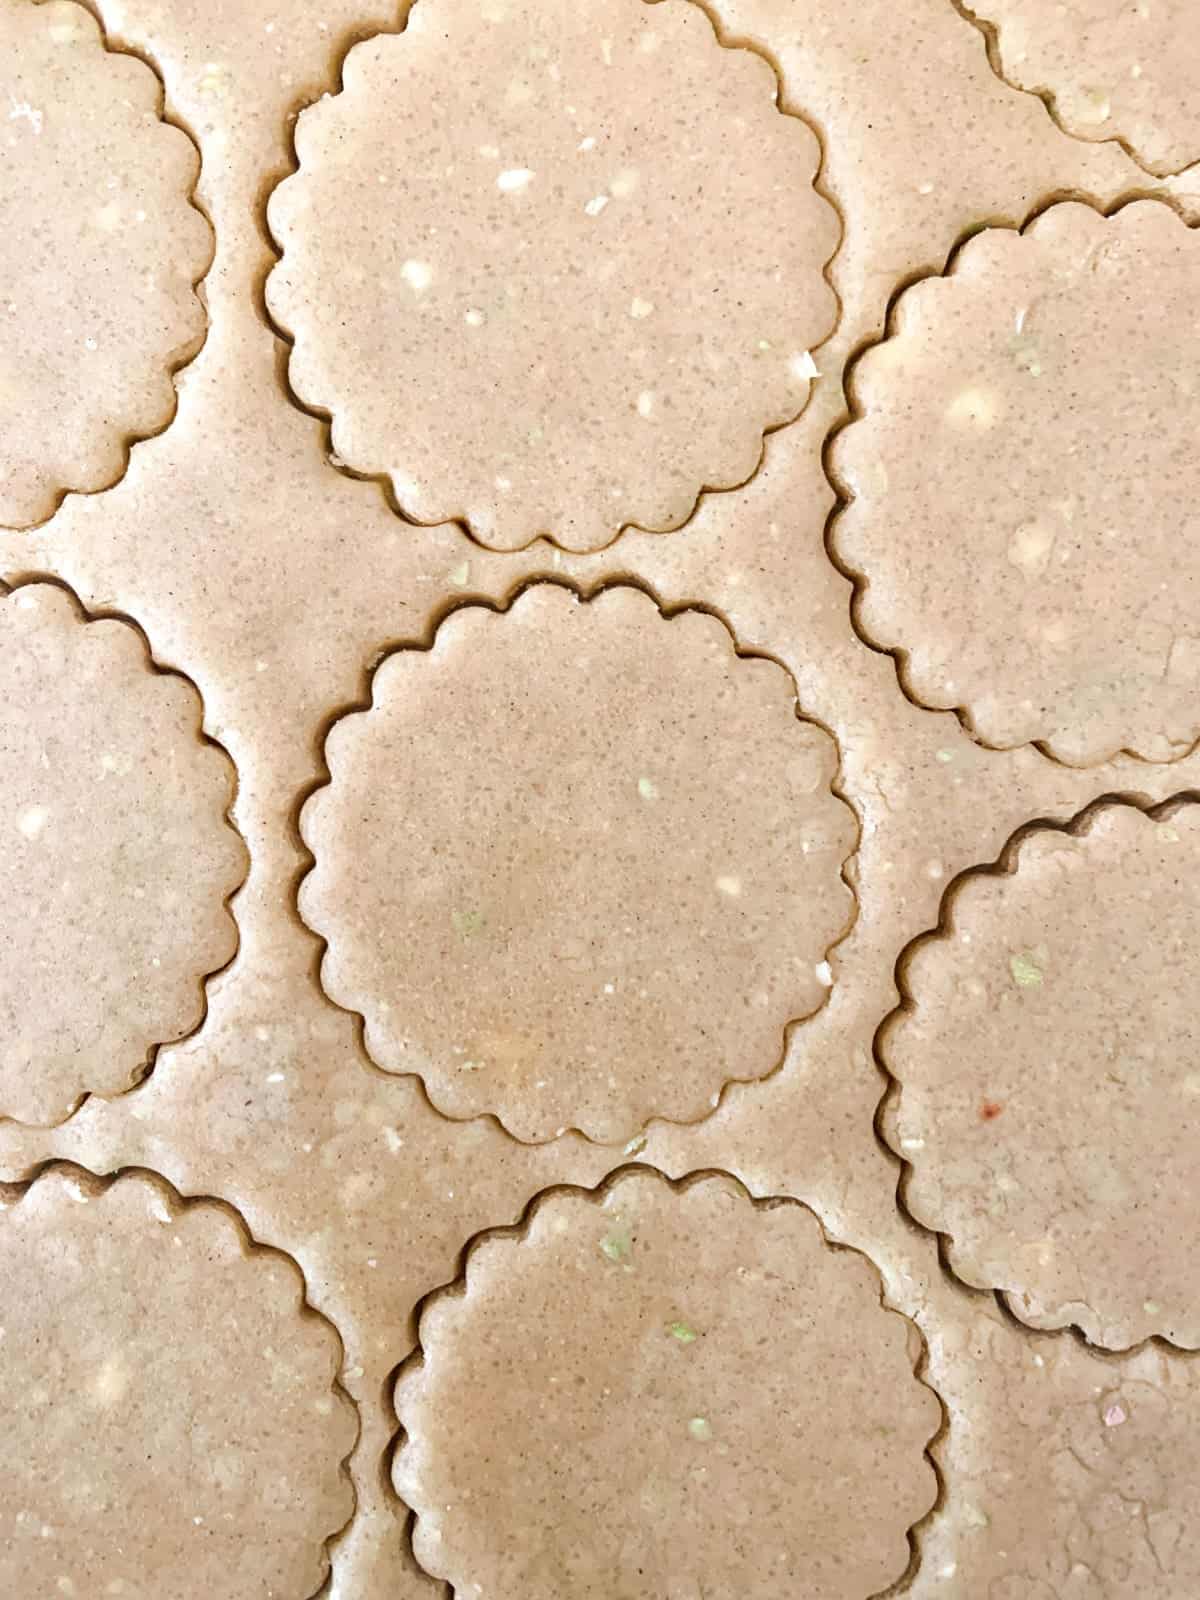 Apple sugar cookie dough with cut-outs.